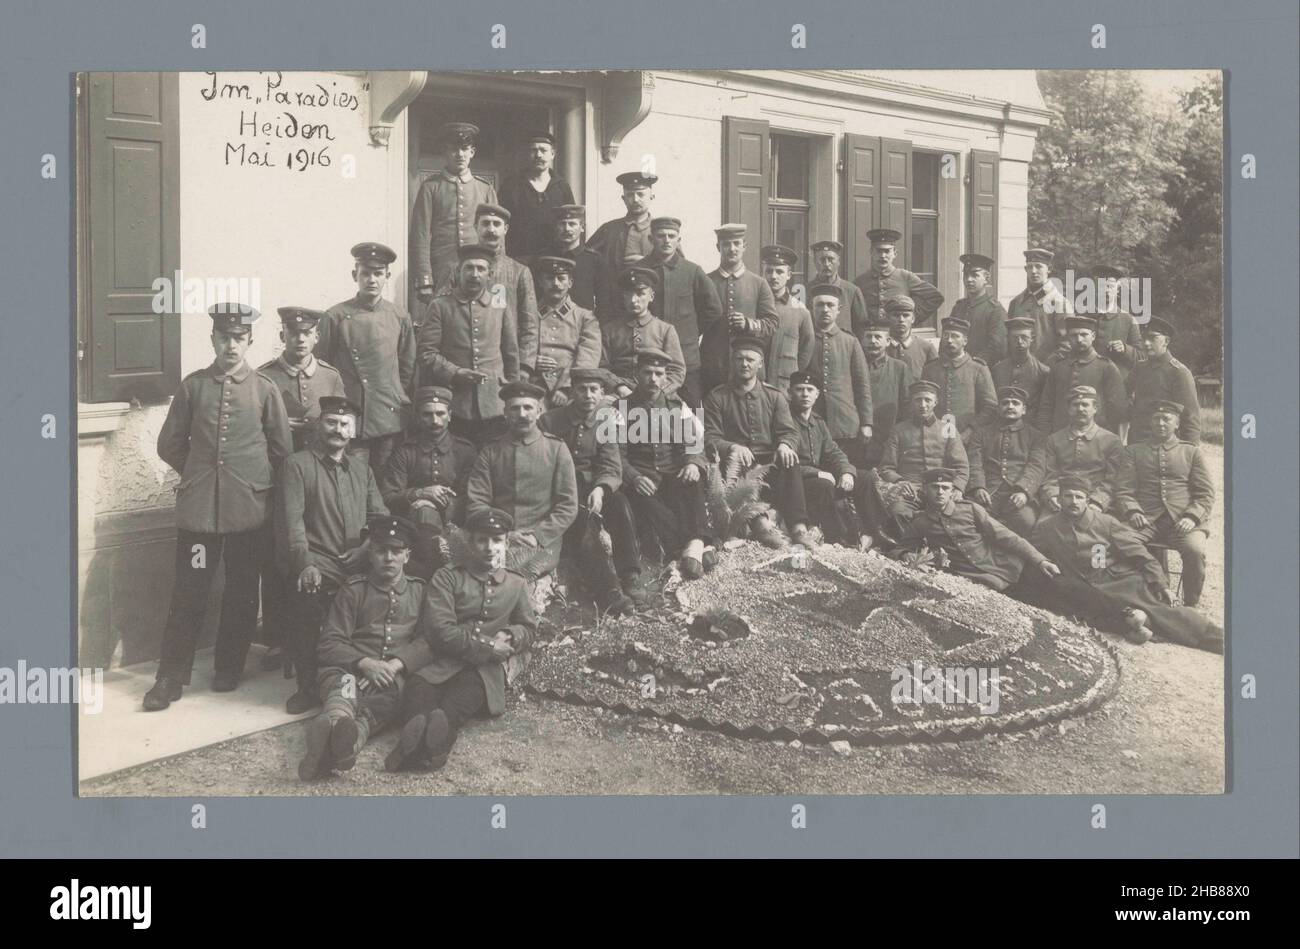 Group portrait of soldiers in uniform in front of a building in Heiden, anonymous, Heiden, May-1916, photographic support, gelatin silver print, height 88 mm × width 137 mm Stock Photo